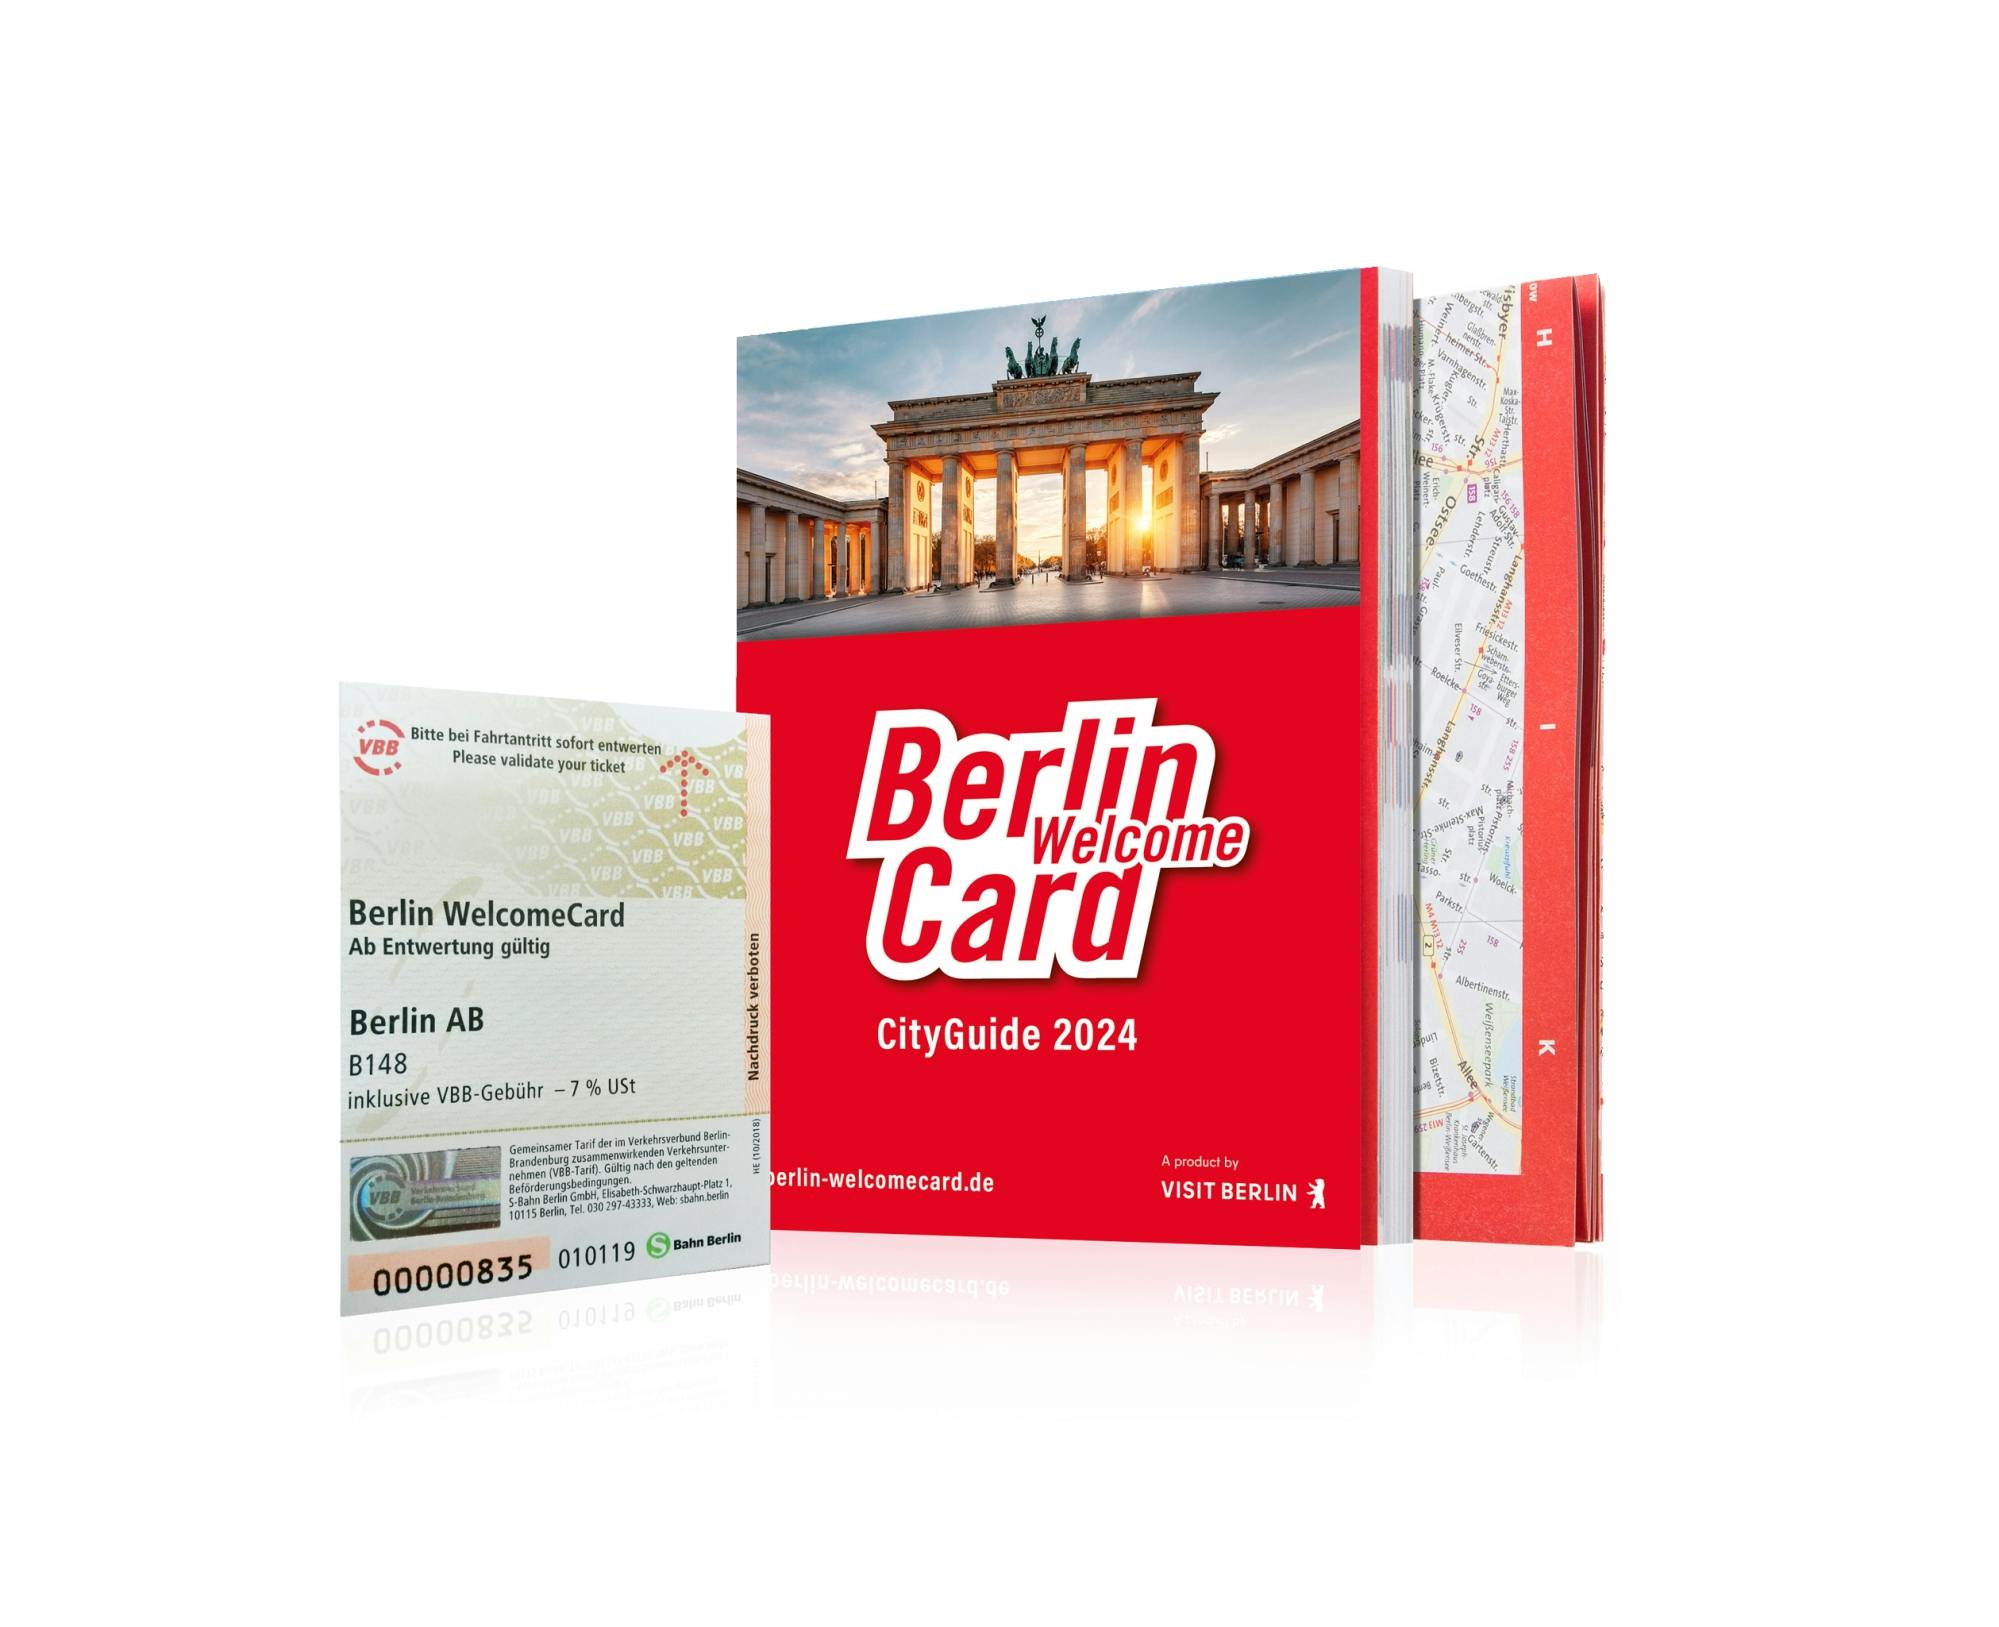 Berlin WelcomeCard free public transport and museum discounts Musement